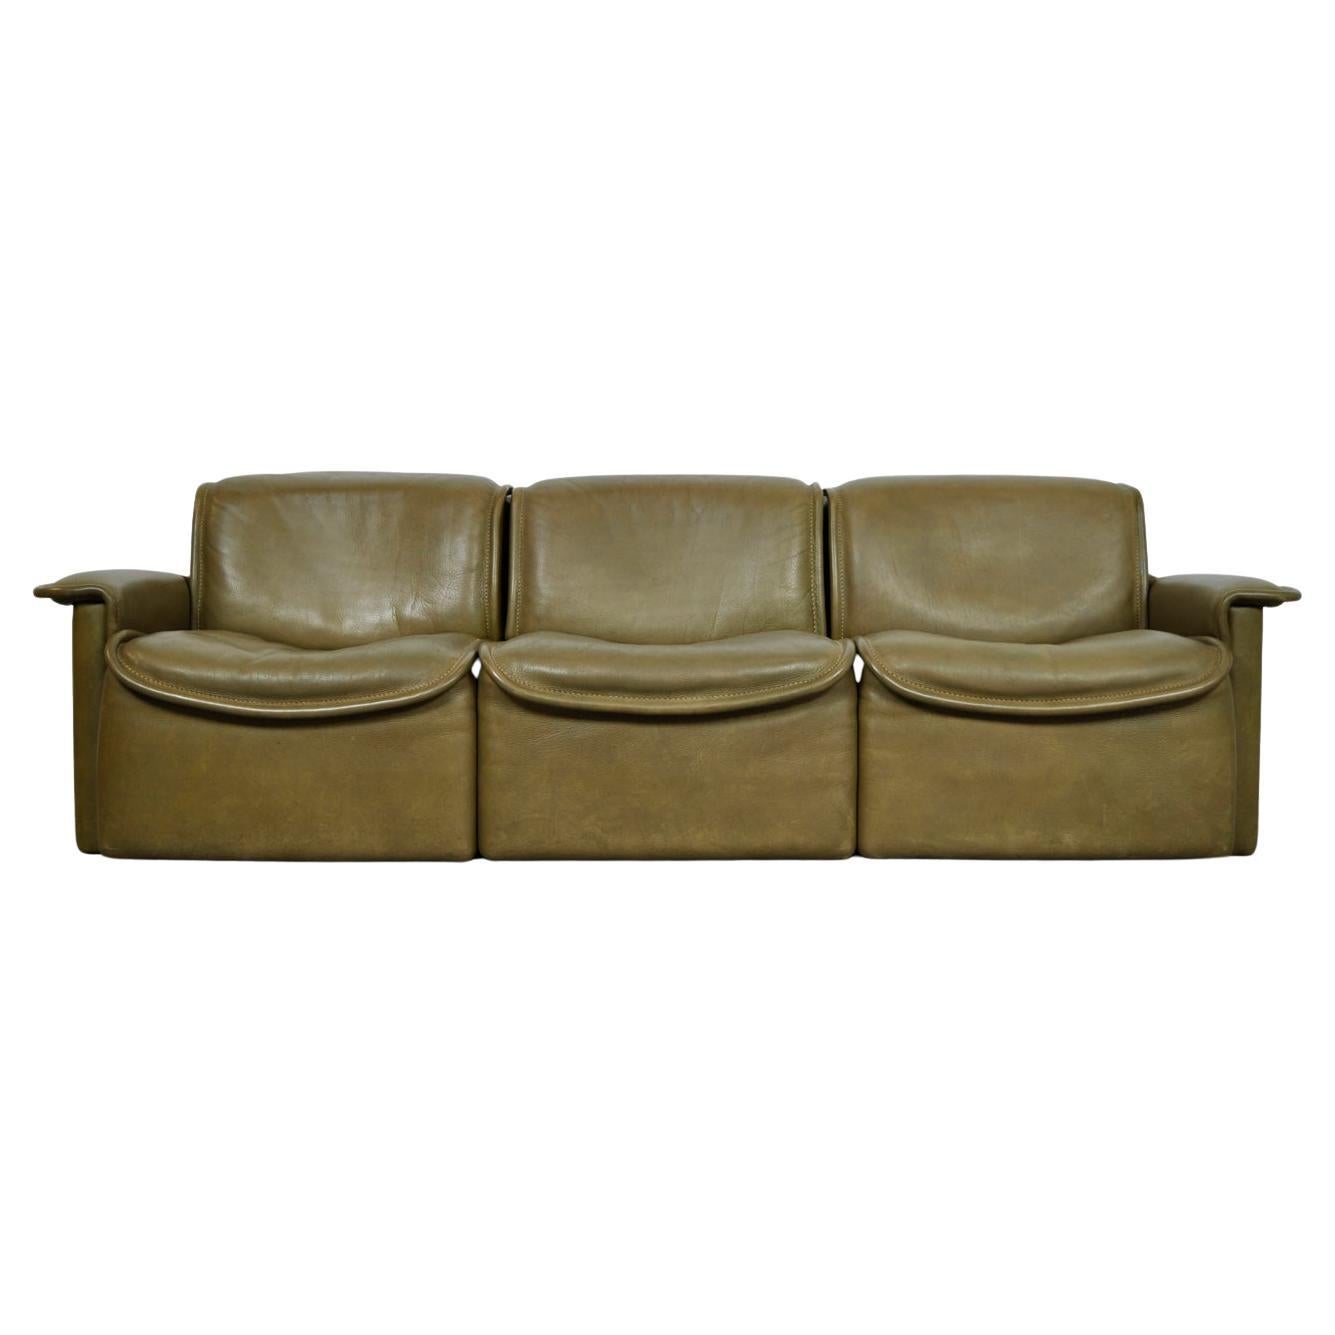 Olive Colored Leather 3-Seater Sofa, Model Ds-12 by De Sede, 1970s Switzerland